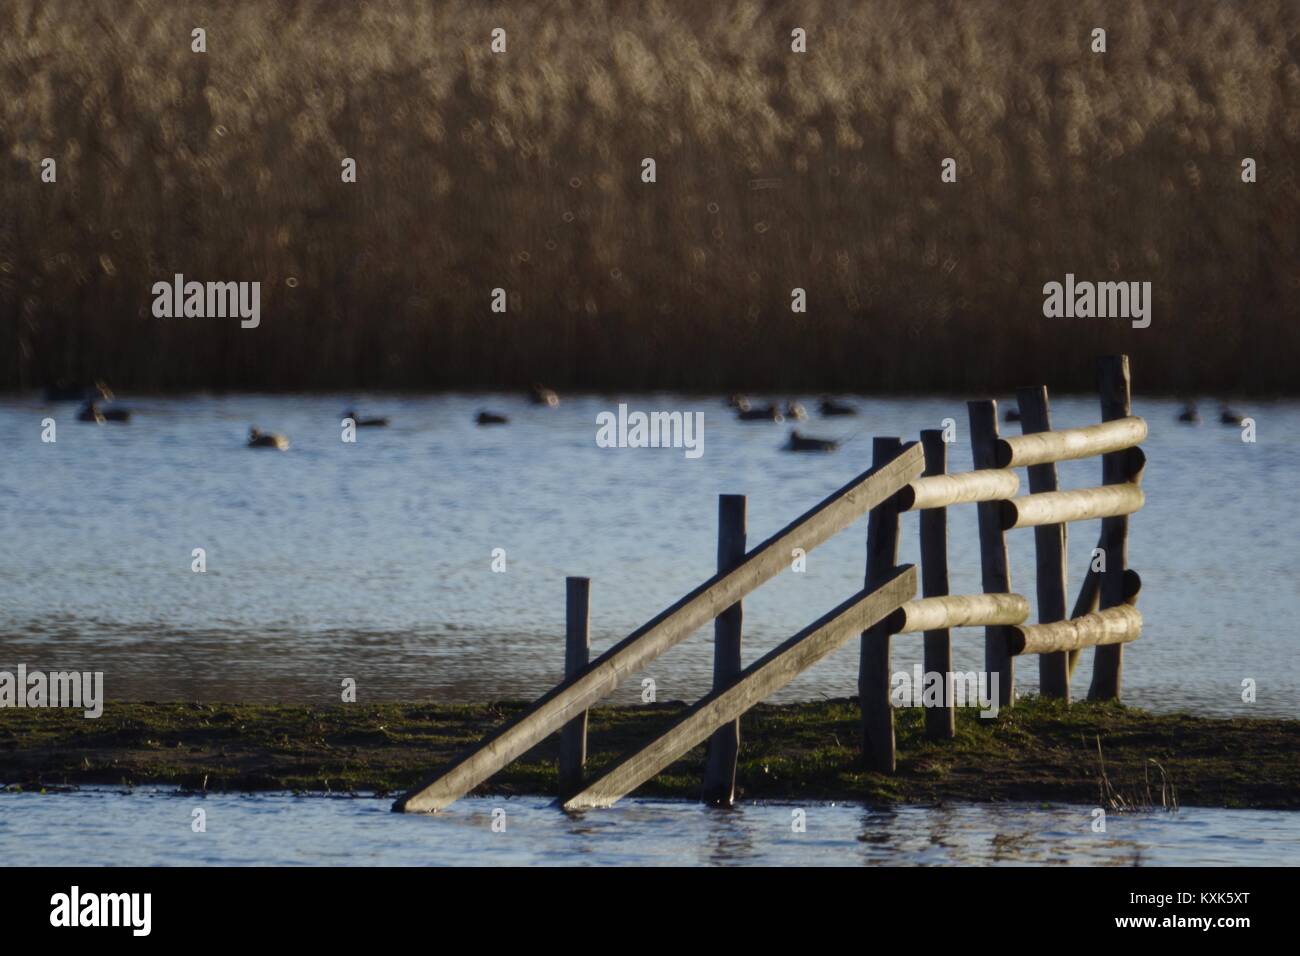 Wooden Fence on a Flooded Meadow with Reed Beds. RSPB Bowling Green Marsh, Exe Estuary, Topsham, Devon, UK. January, 2018. Stock Photo